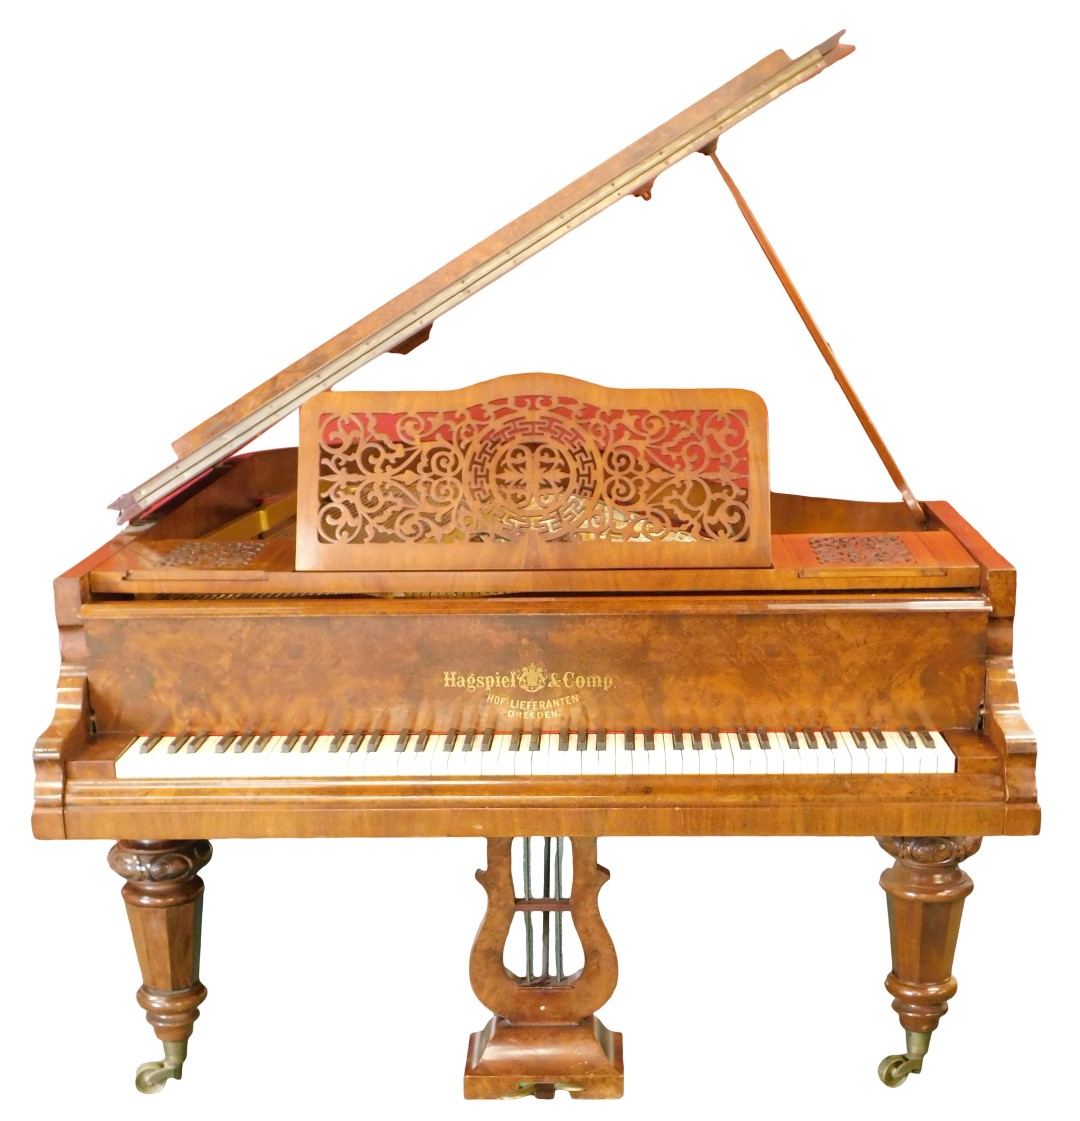 A late Hagspiel and Company Dresden grand piano, in a burr and figured walnut case, simulated ivory